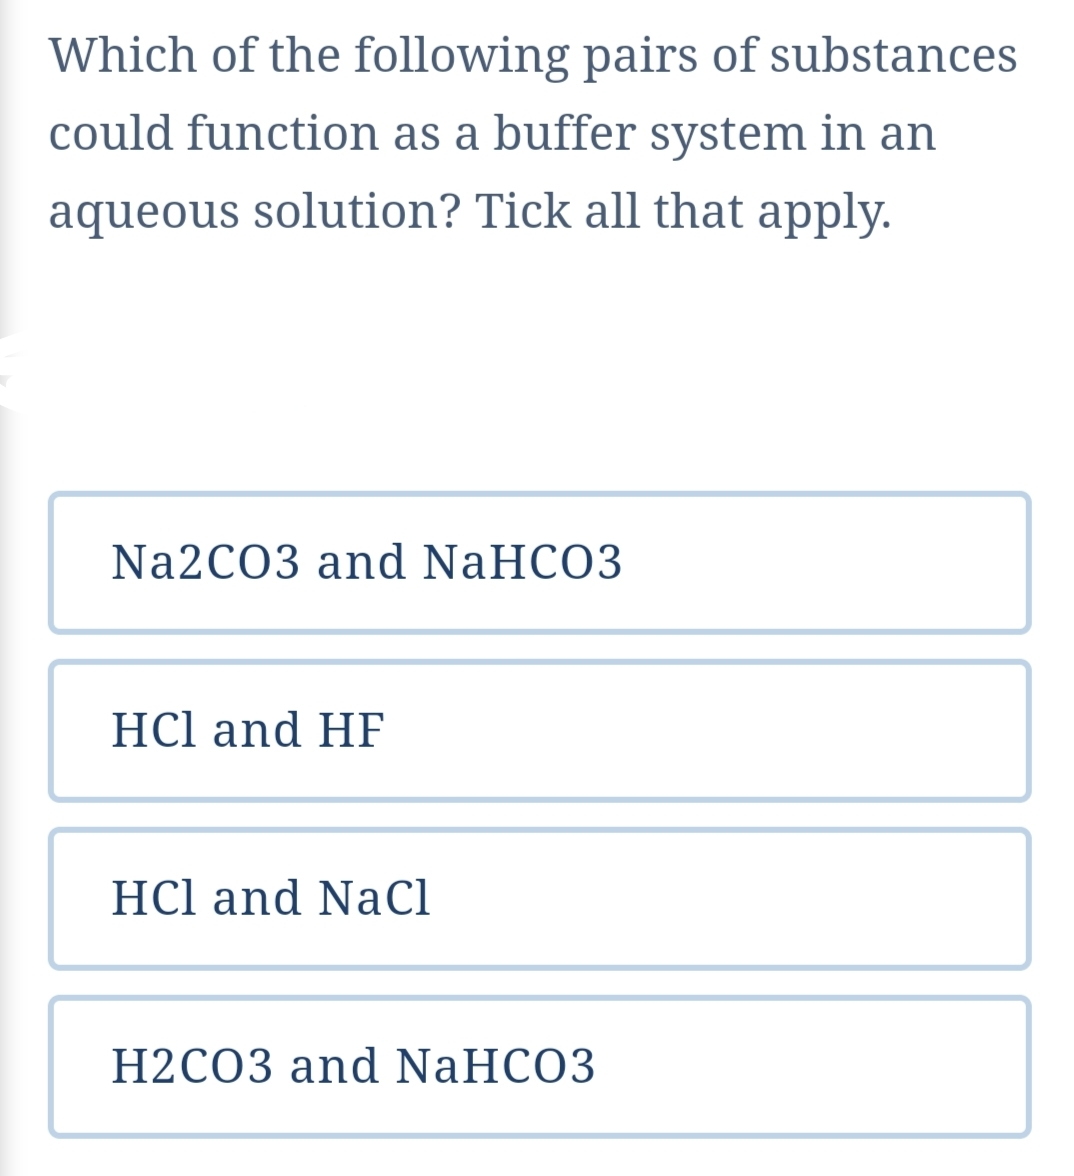 Which of the following pairs of substances
could function as a buffer system in an
aqueous solution? Tick all that apply.
Na2CO3 and NaHCO3
HСl and HF
HCl and NaCl
Н2СОЗ and NaHCO3
